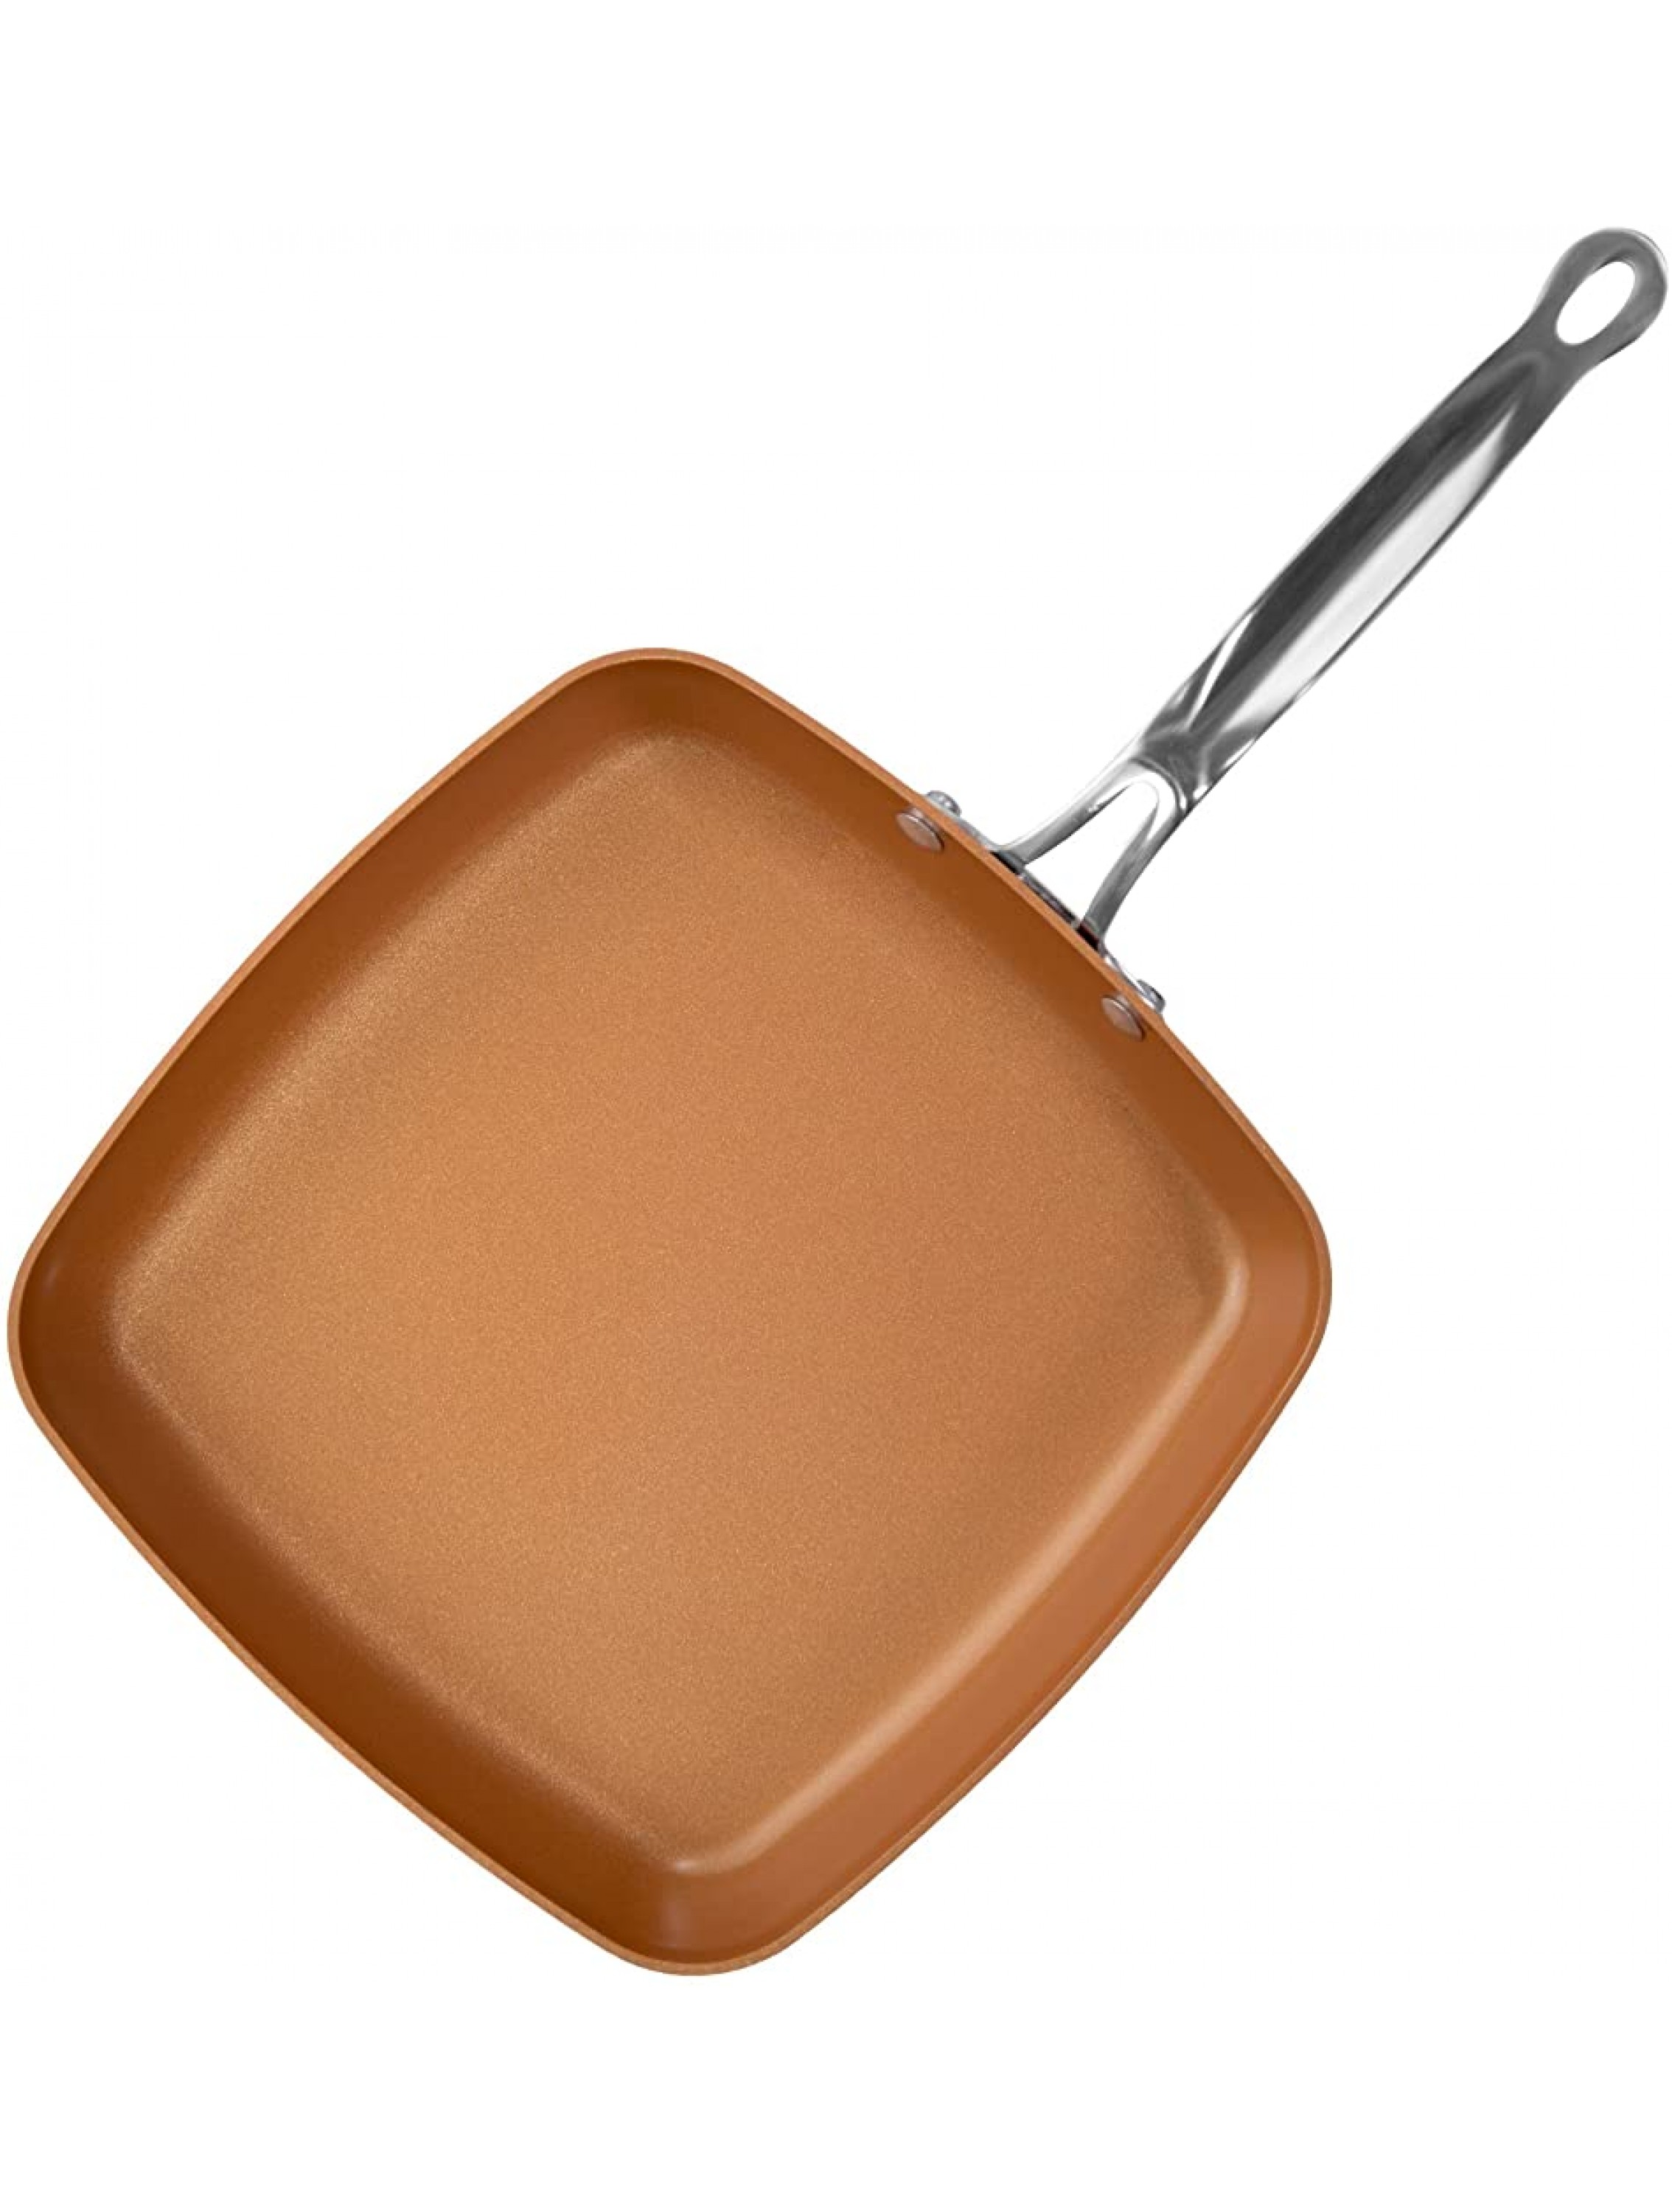 Red Copper Double-Coated 9.5-Inch Square Dance Pan by BulbHead - BKAP8PS1O